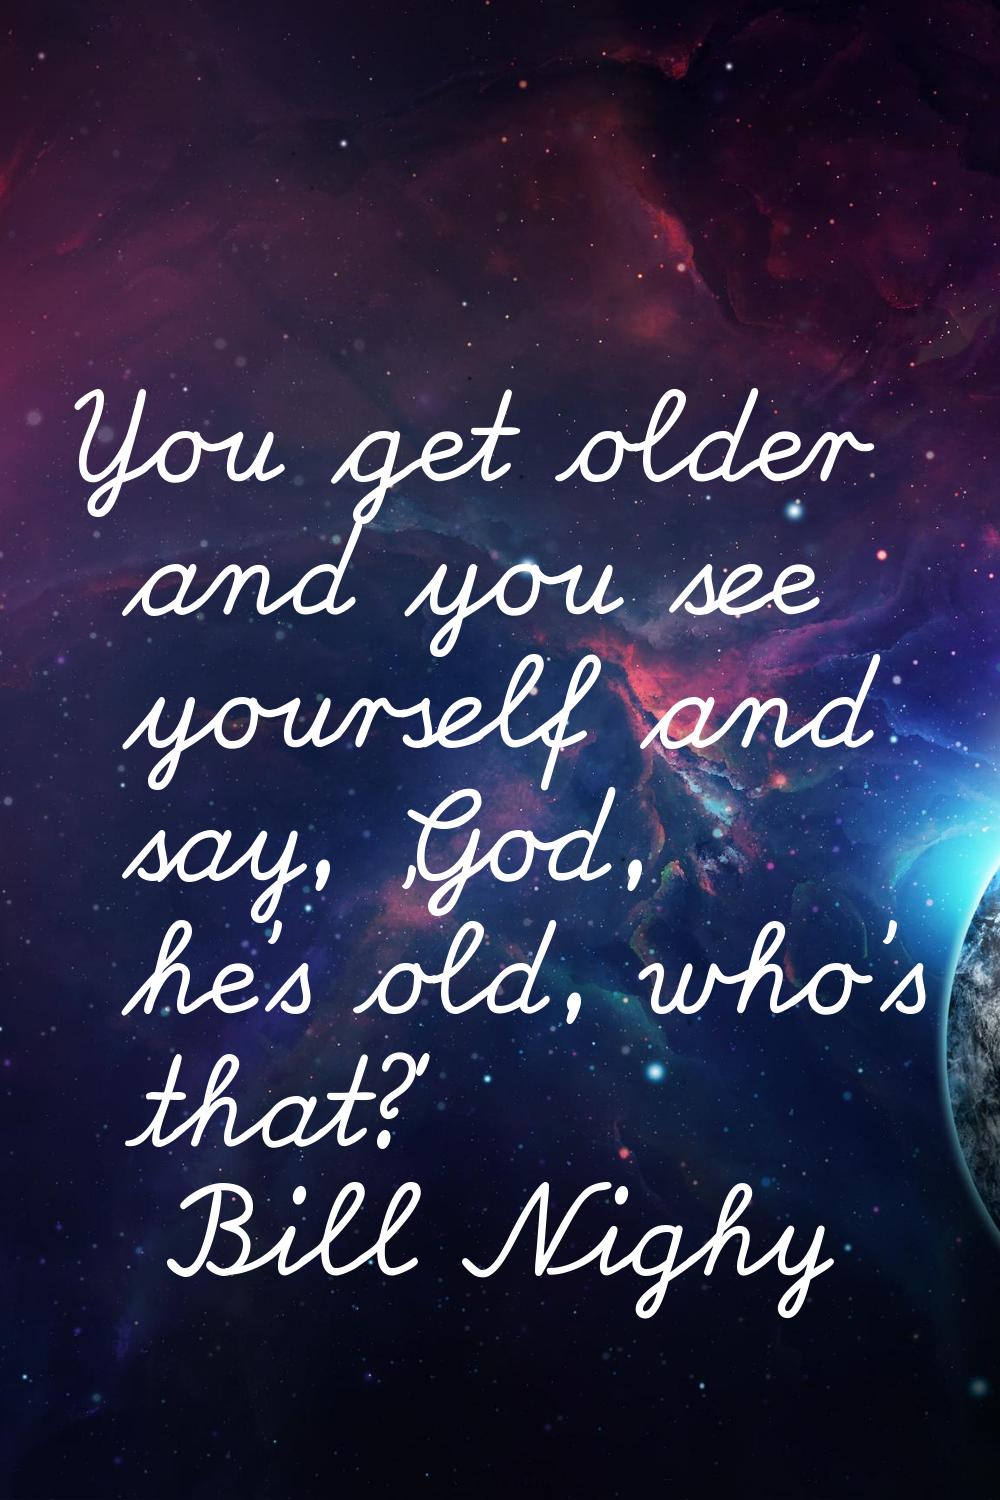 You get older and you see yourself and say, 'God, he's old, who's that?'